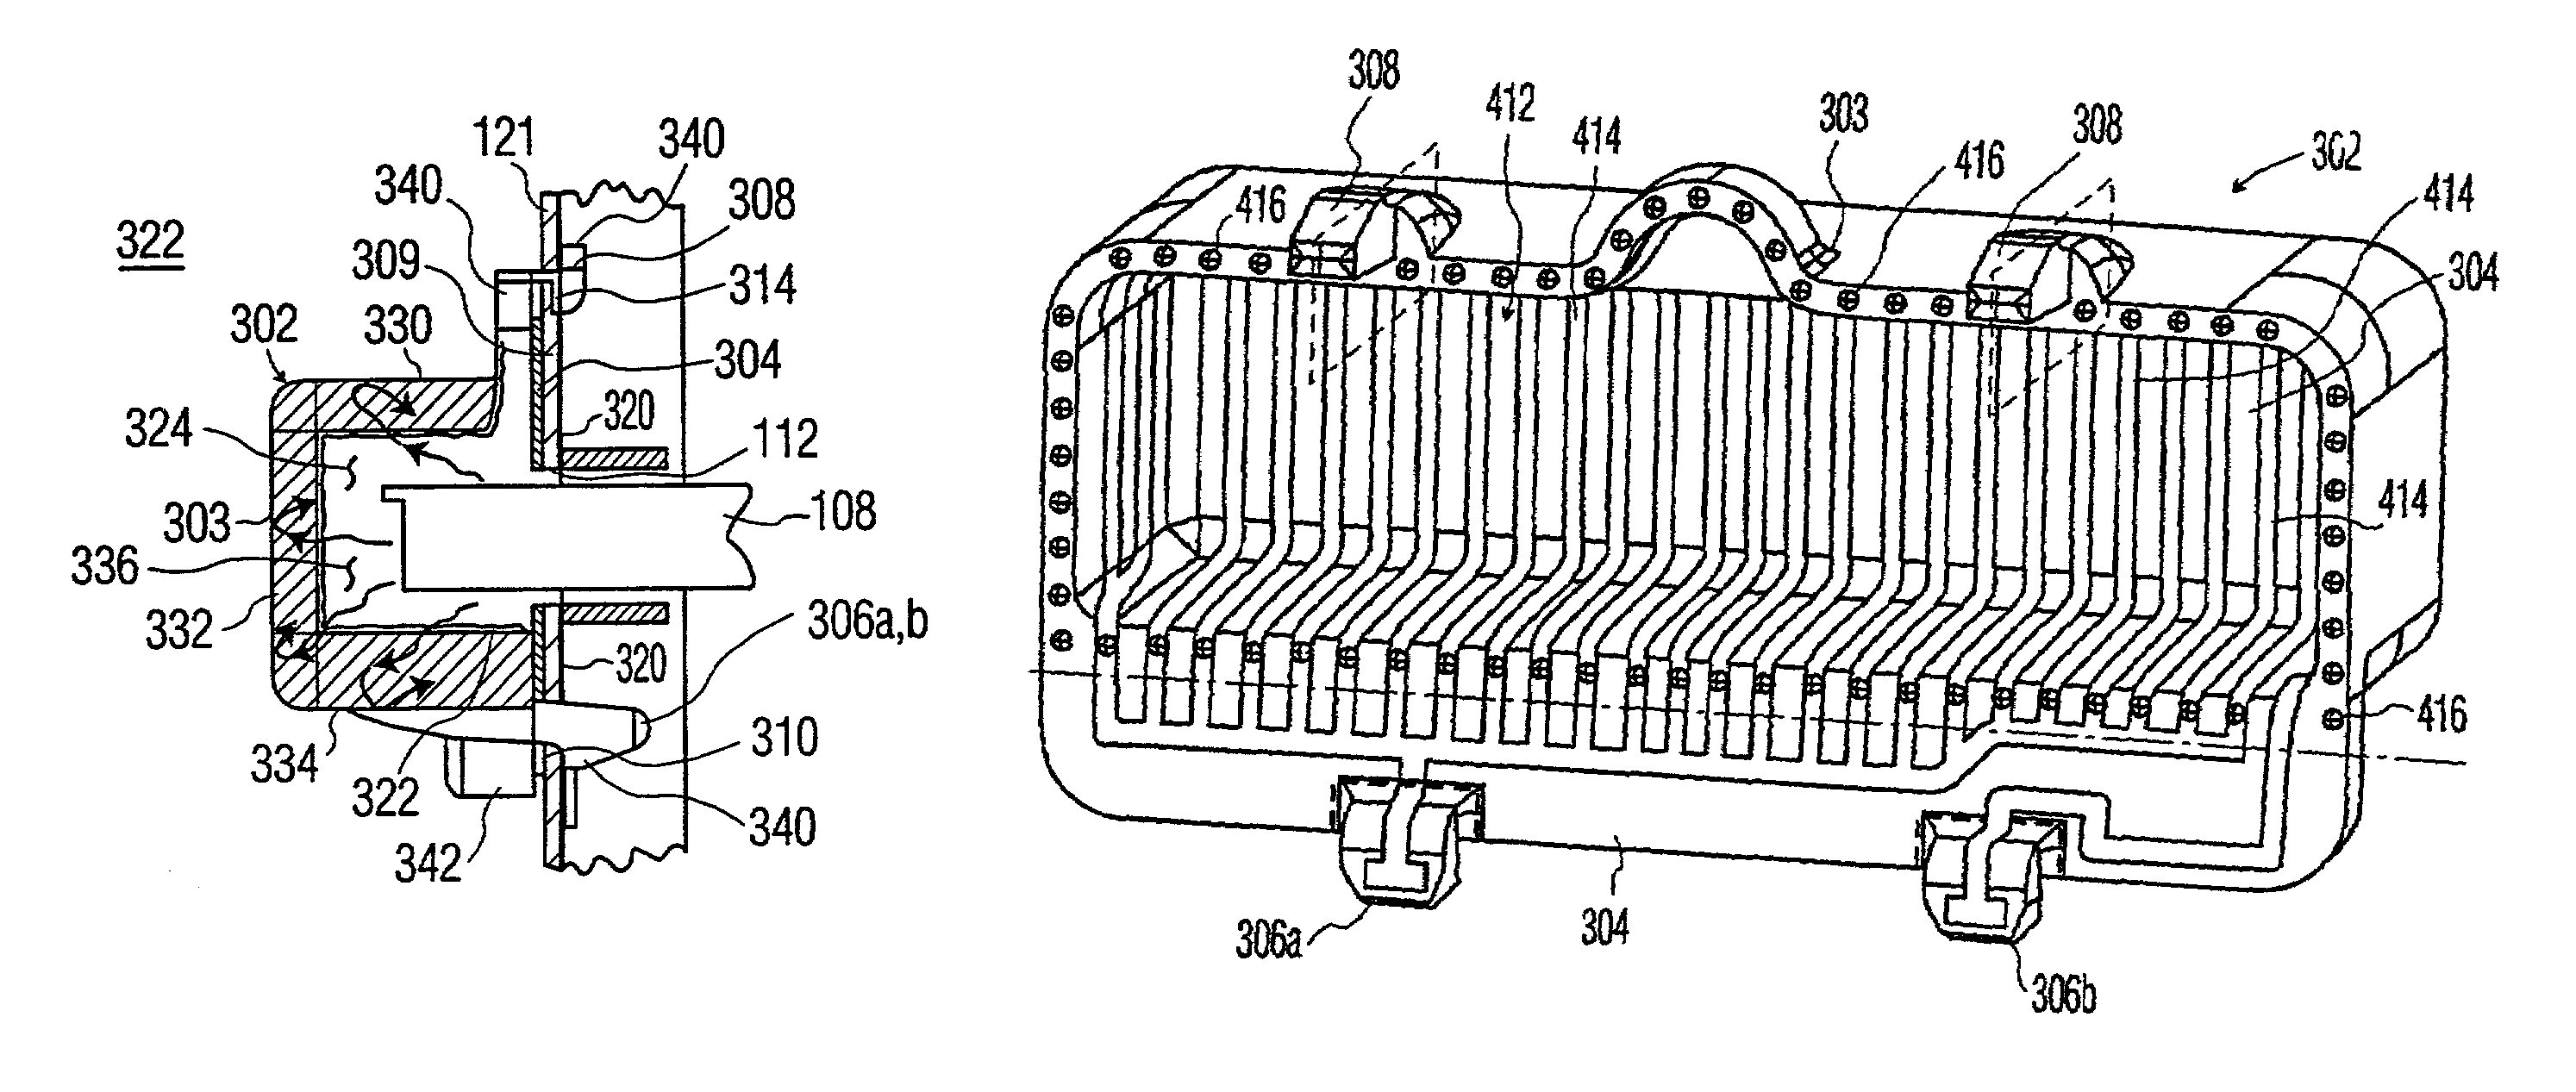 Port cover for limiting transfer of electromagnetic radiation from a port defined in a host device